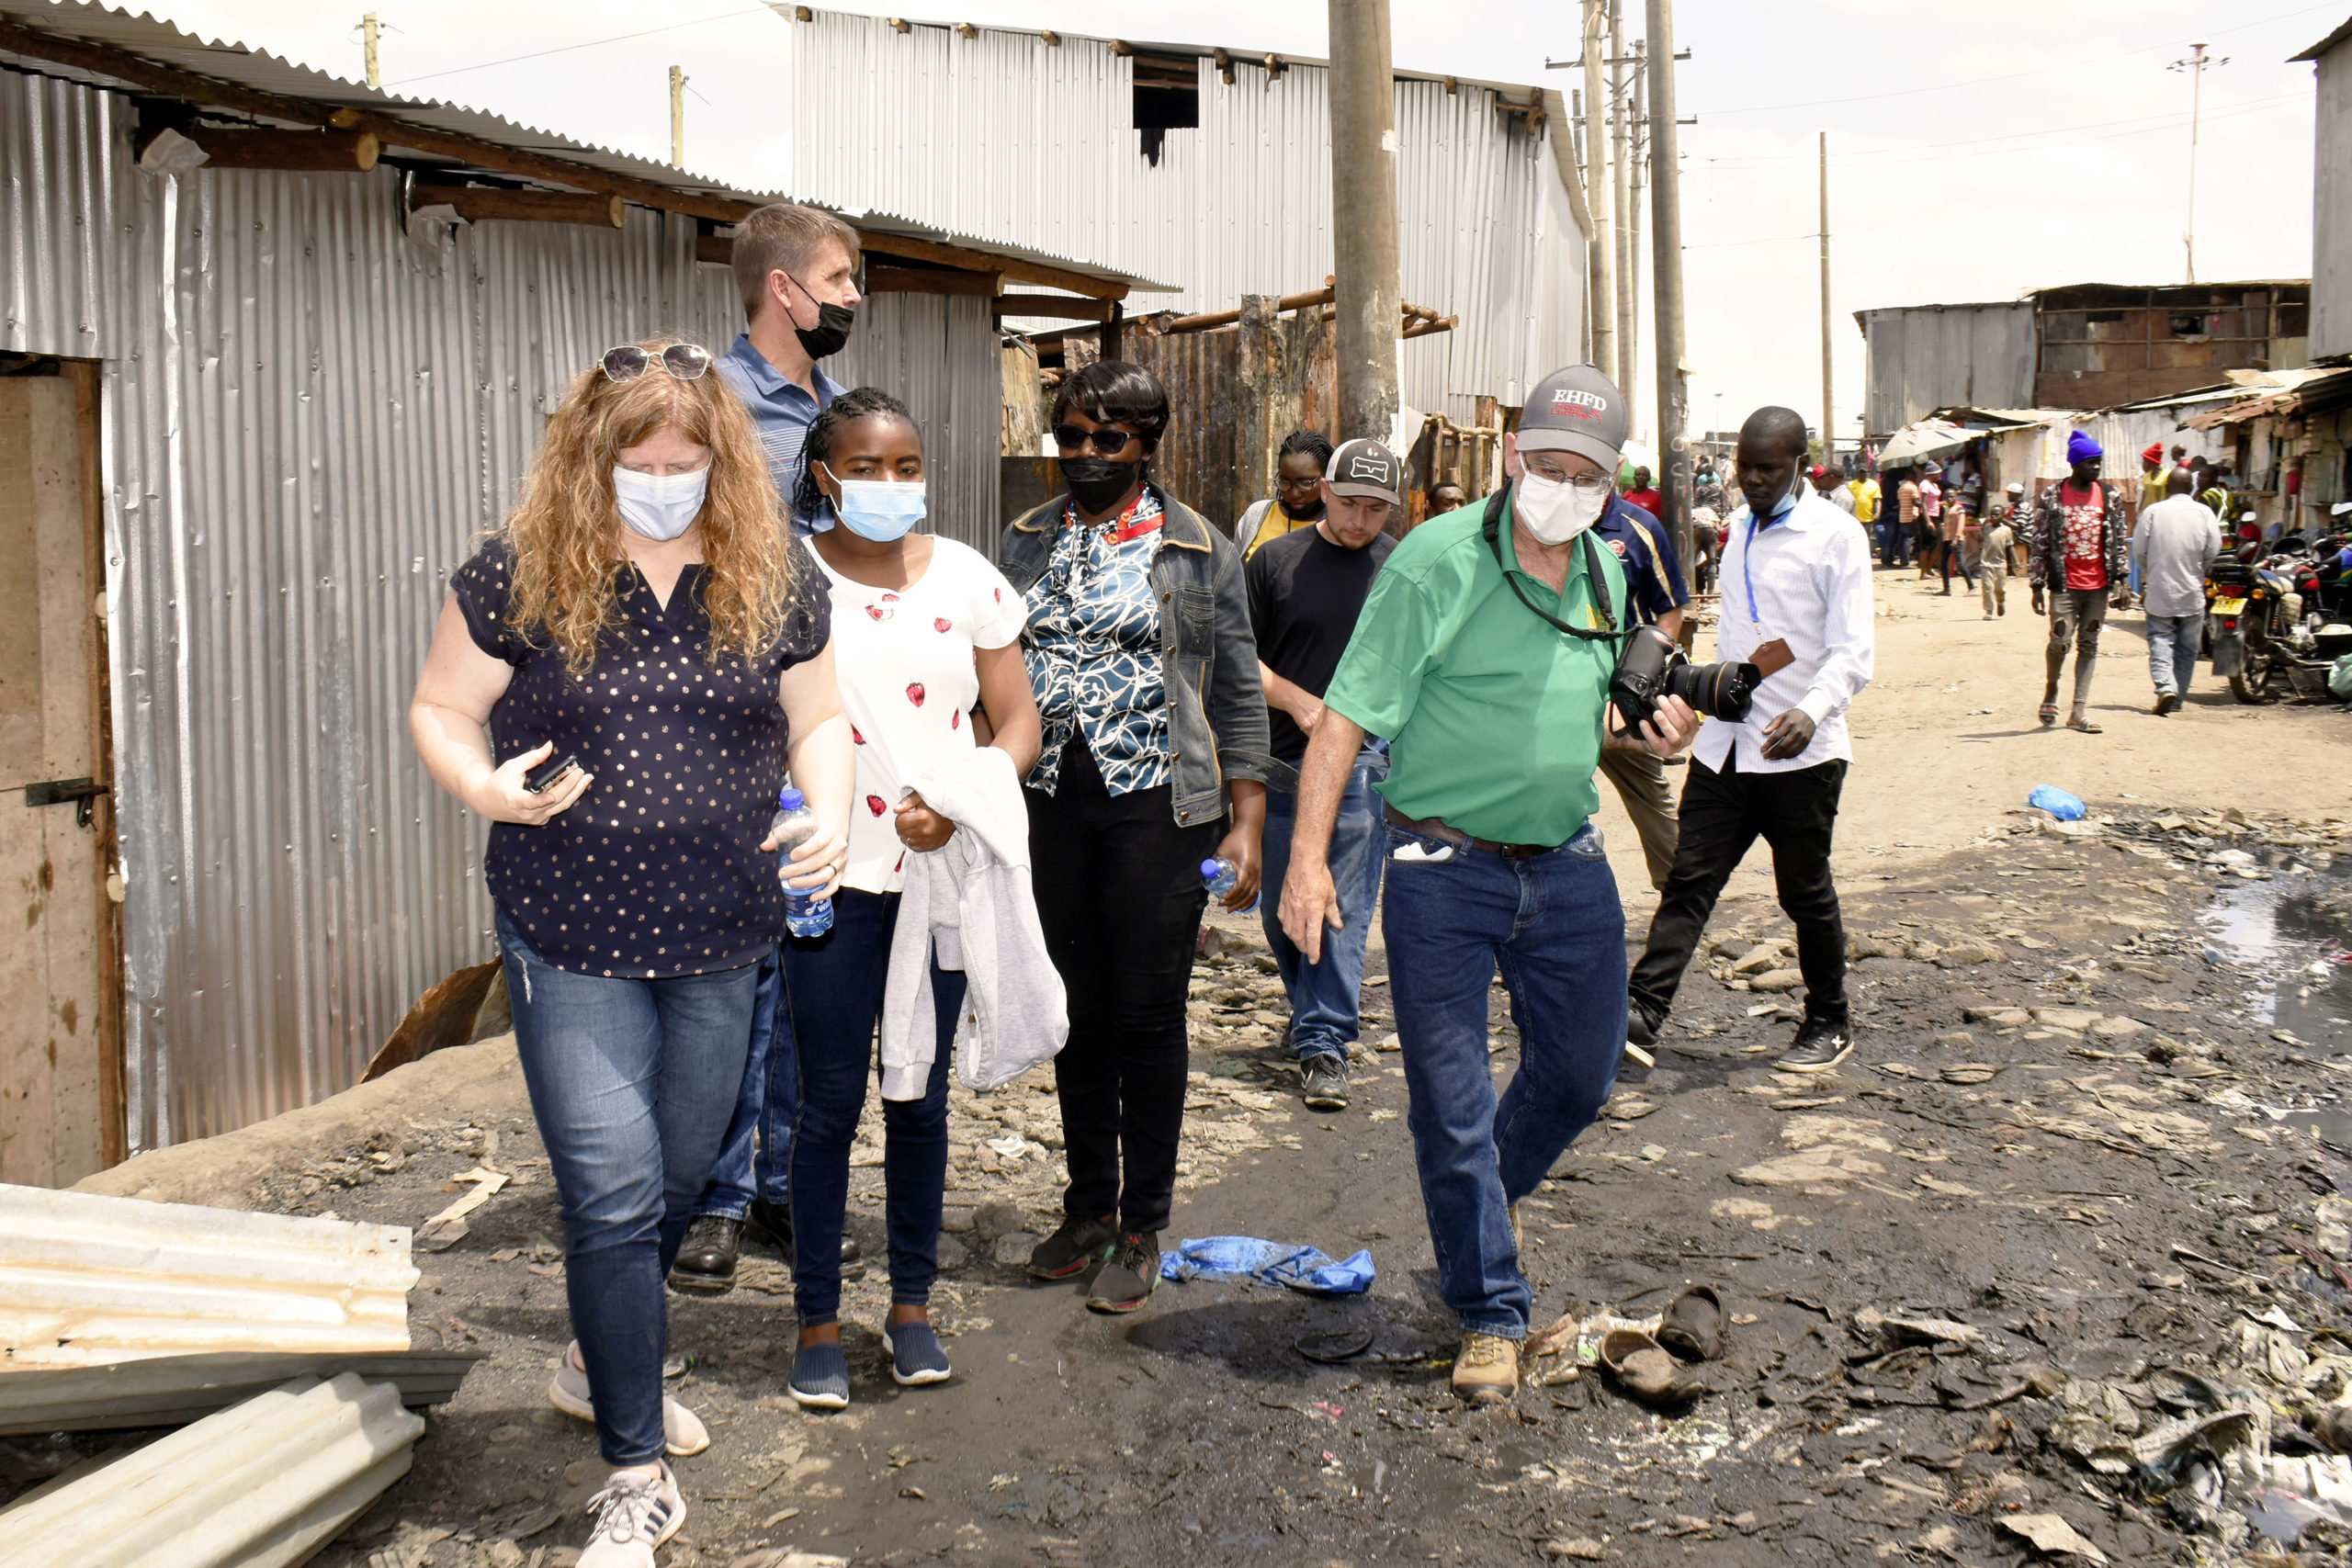 Michael Heller, right, walks with a group through the Mathare Valley slum, which is part of the larger Mathare slum, in Nairobi, Kenya.